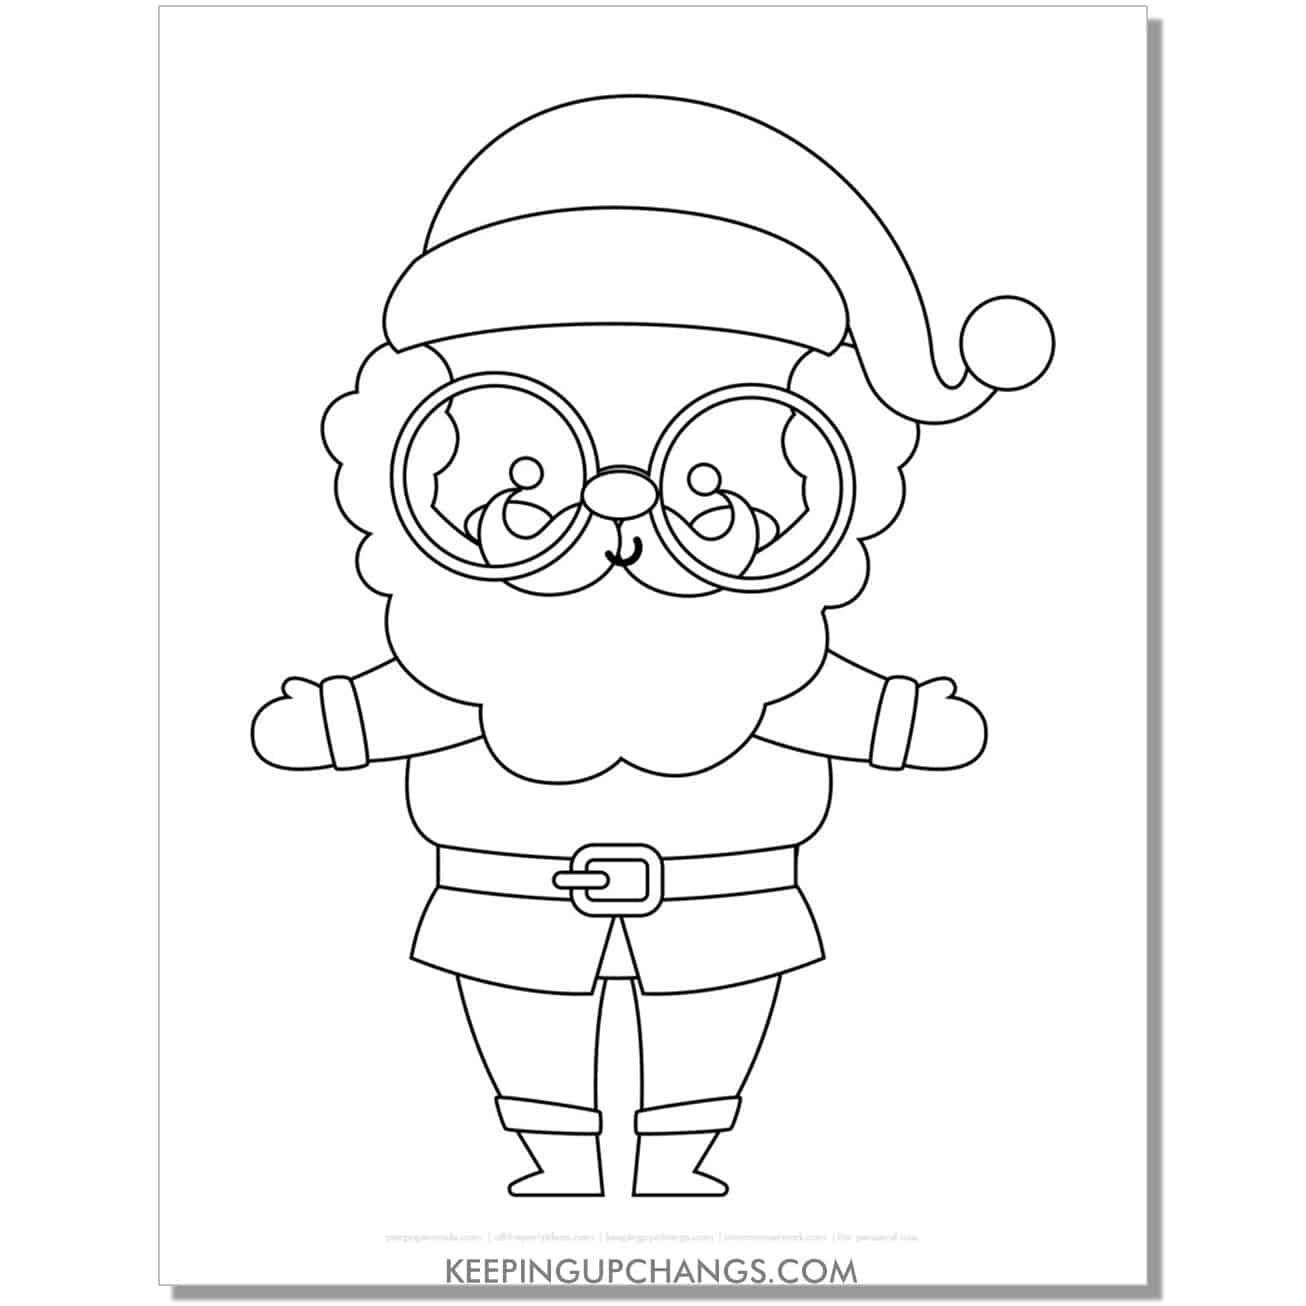 free big. large cute santa with glasses outline, cut out template in black and white.